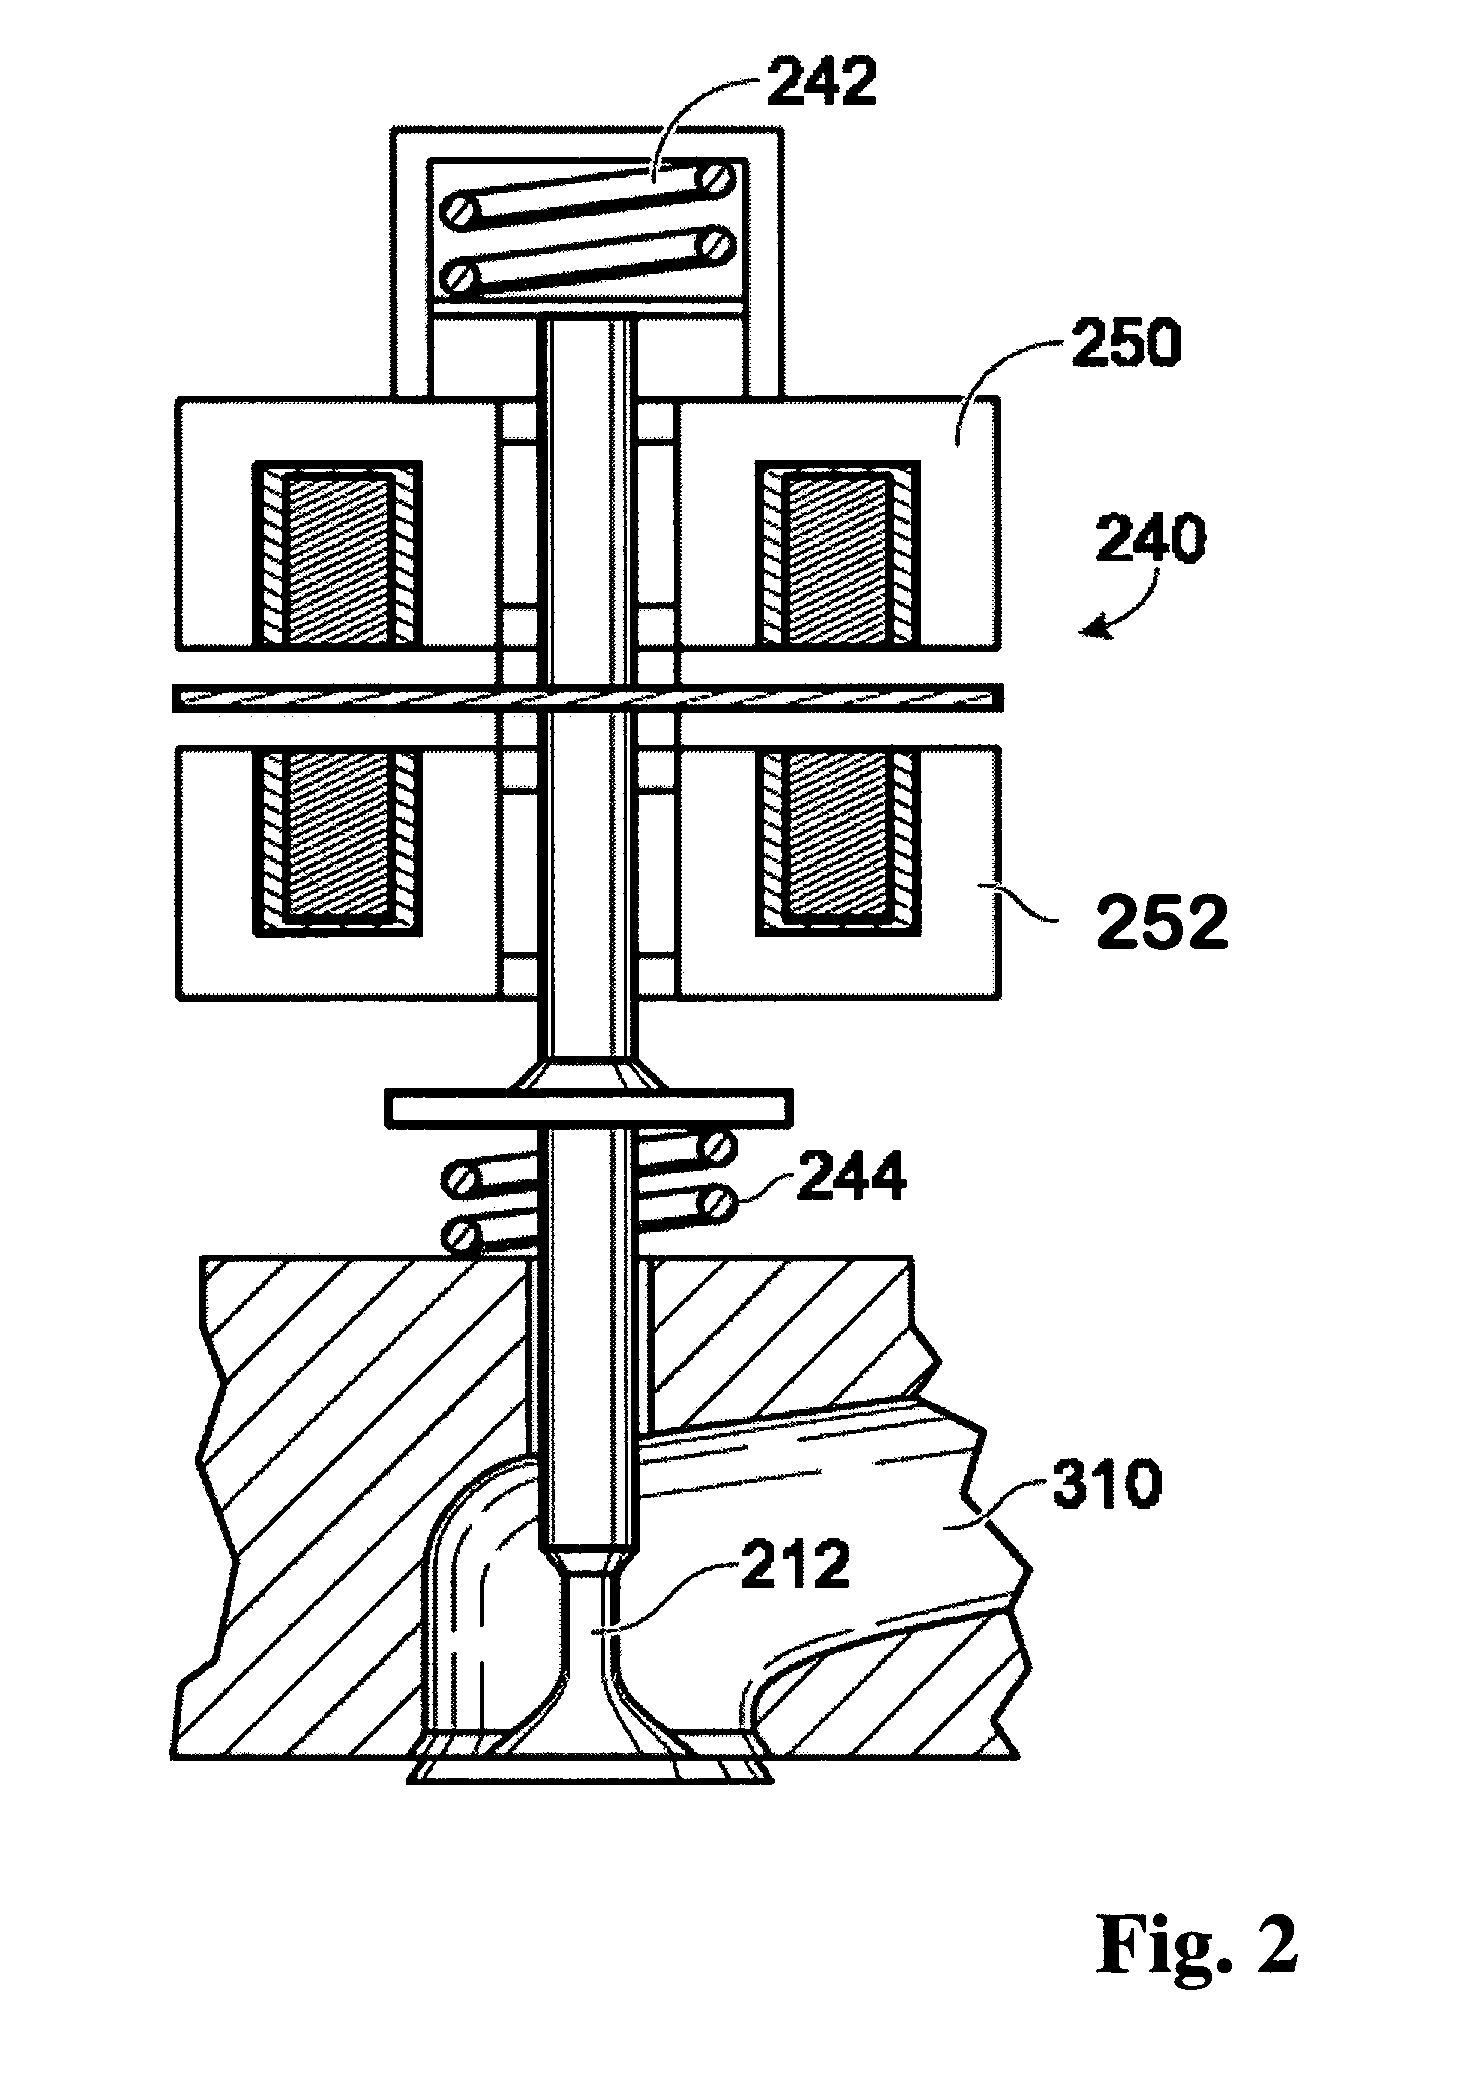 Exhaust reductant generation in a direct injection engine with cylinder deactivation